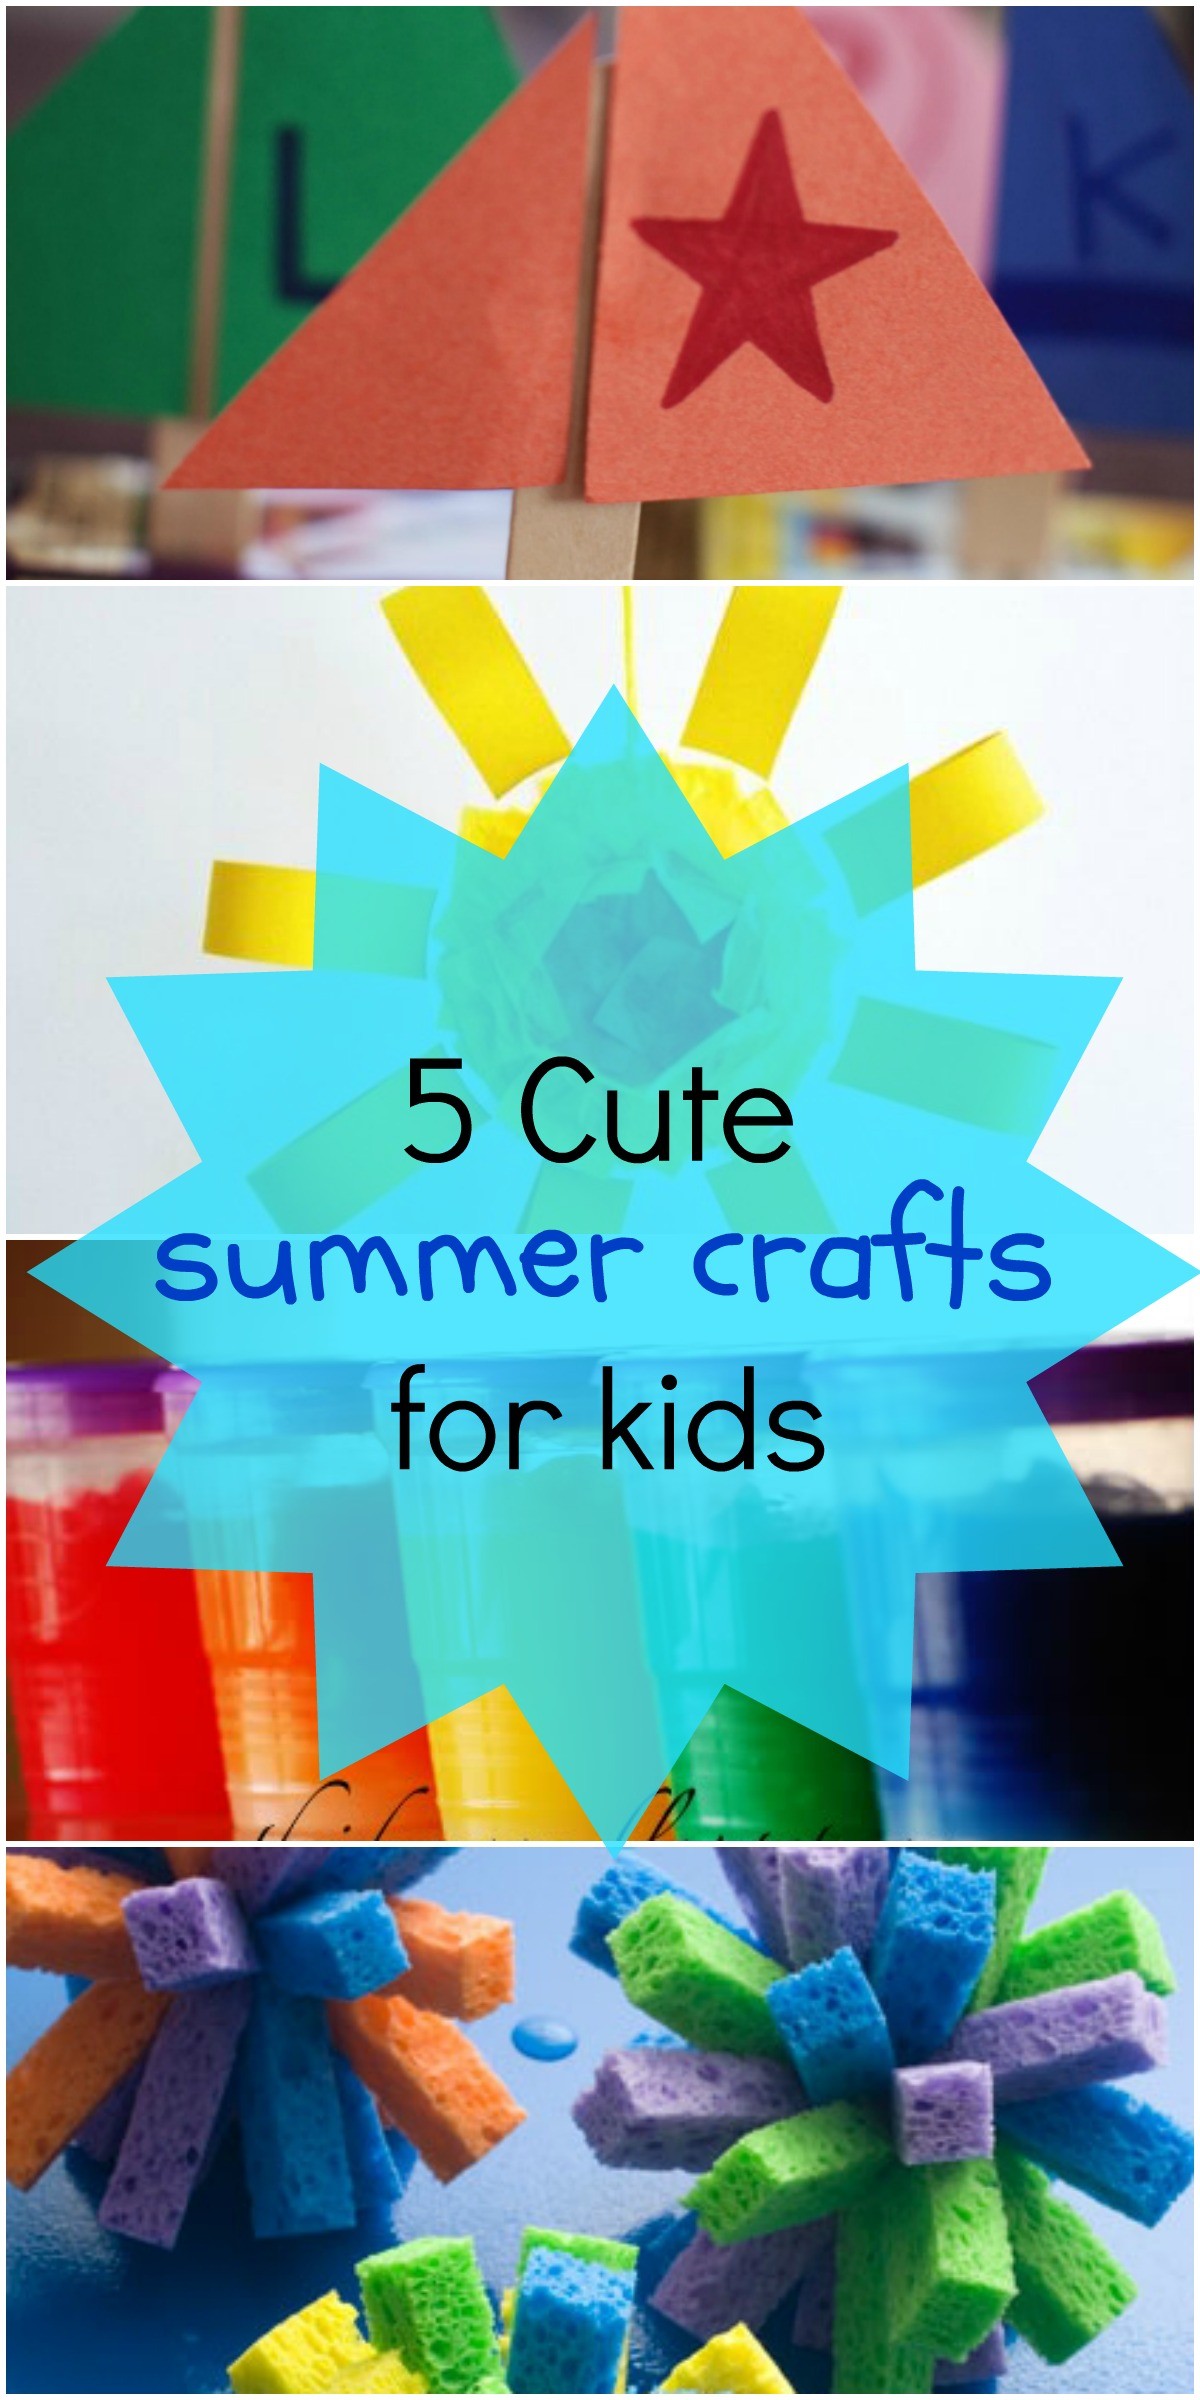 5-fun-summer-crafts-for-kids-love-these-art-project-ideas